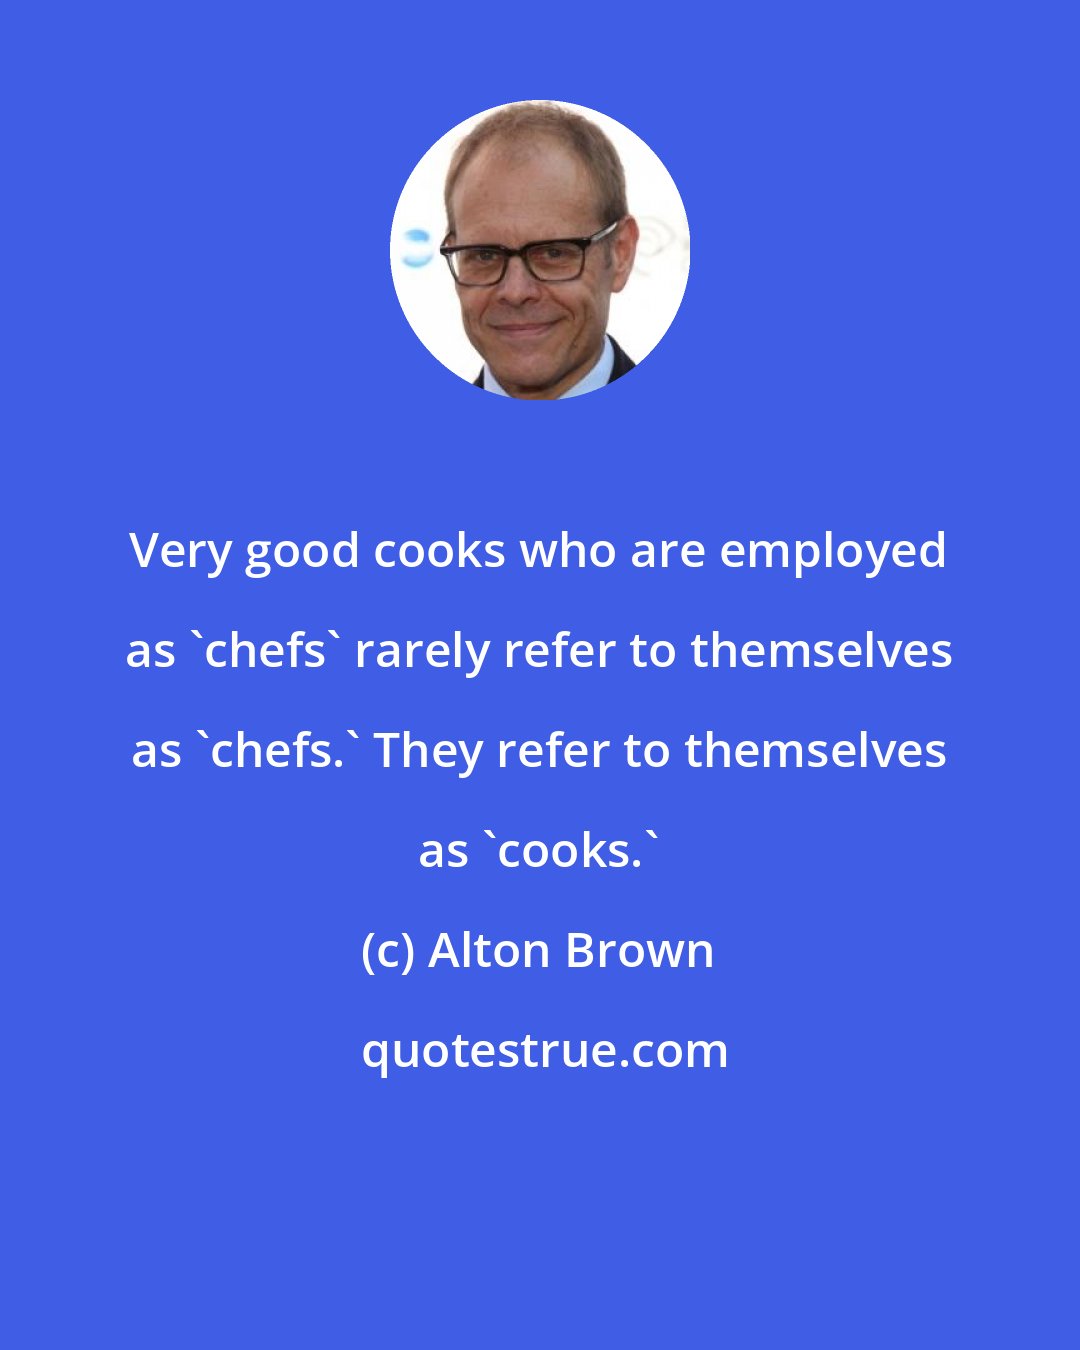 Alton Brown: Very good cooks who are employed as 'chefs' rarely refer to themselves as 'chefs.' They refer to themselves as 'cooks.'